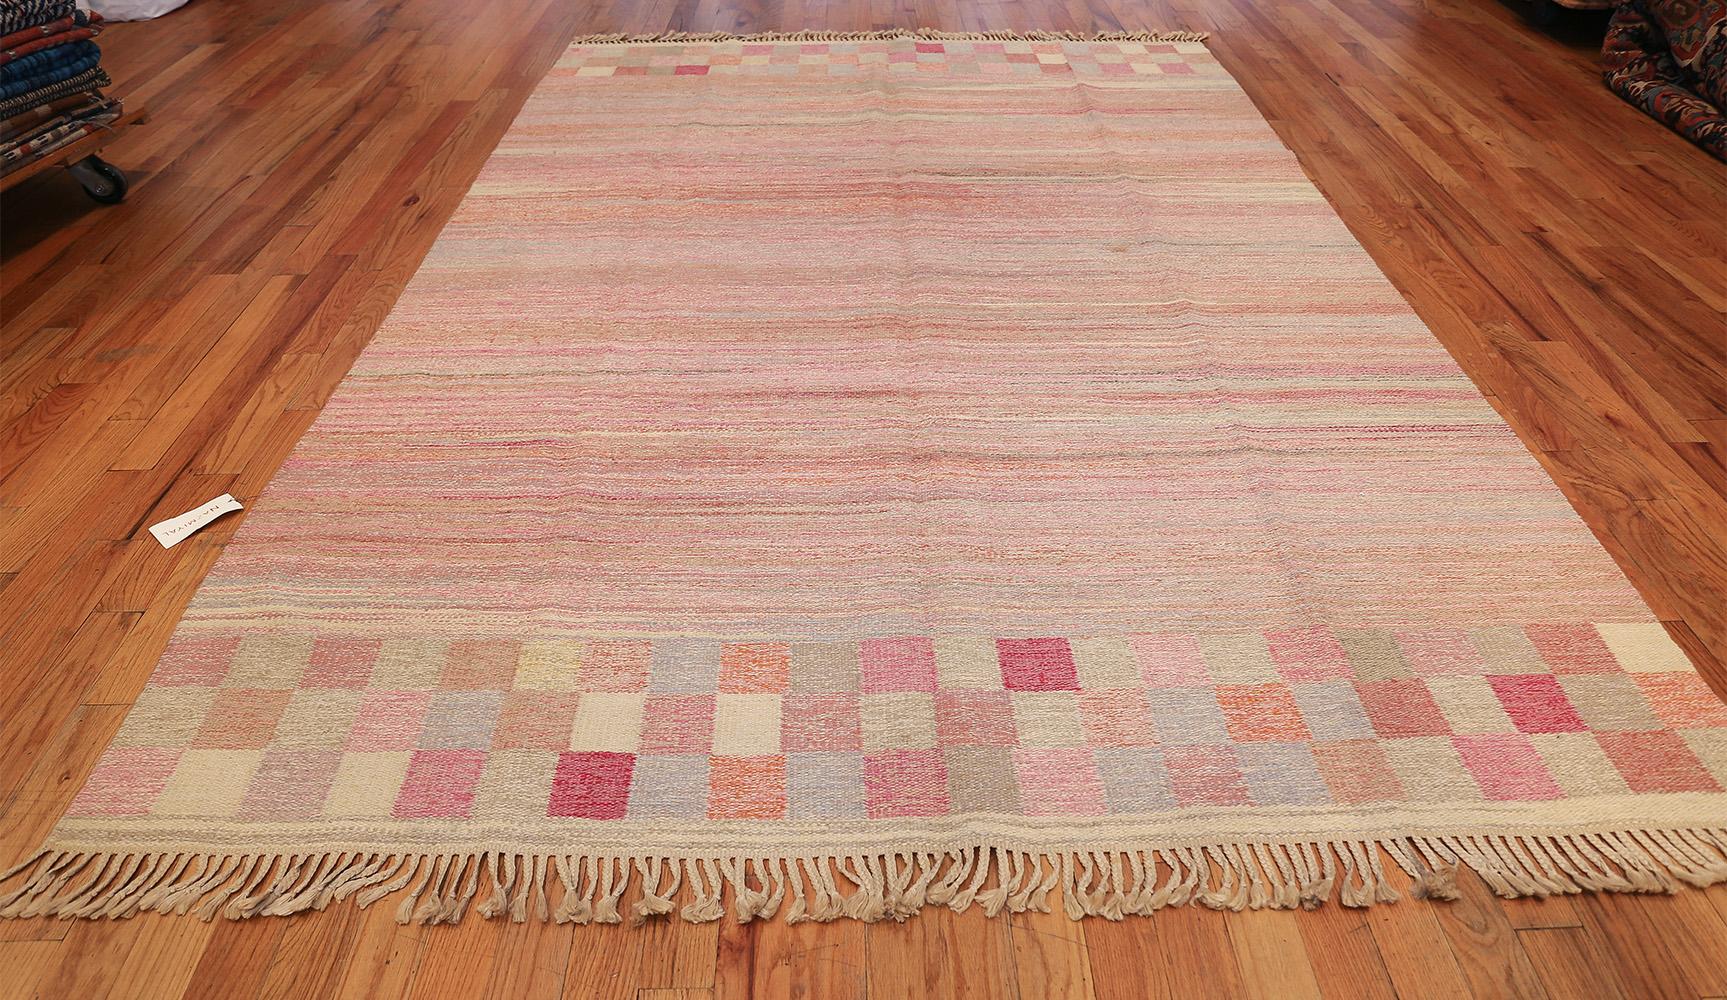 Vintage Swedish Kilim rug, country of origin: Sweden, circa date: Vintage / Mid-20th century. Size: 7 ft 3 in x 10 ft 8 in (2.21 m x 3.25 m)

This vintage flat-woven kilim combines soft pinks, rose-red, oatmeal and ashy browns in a subtle